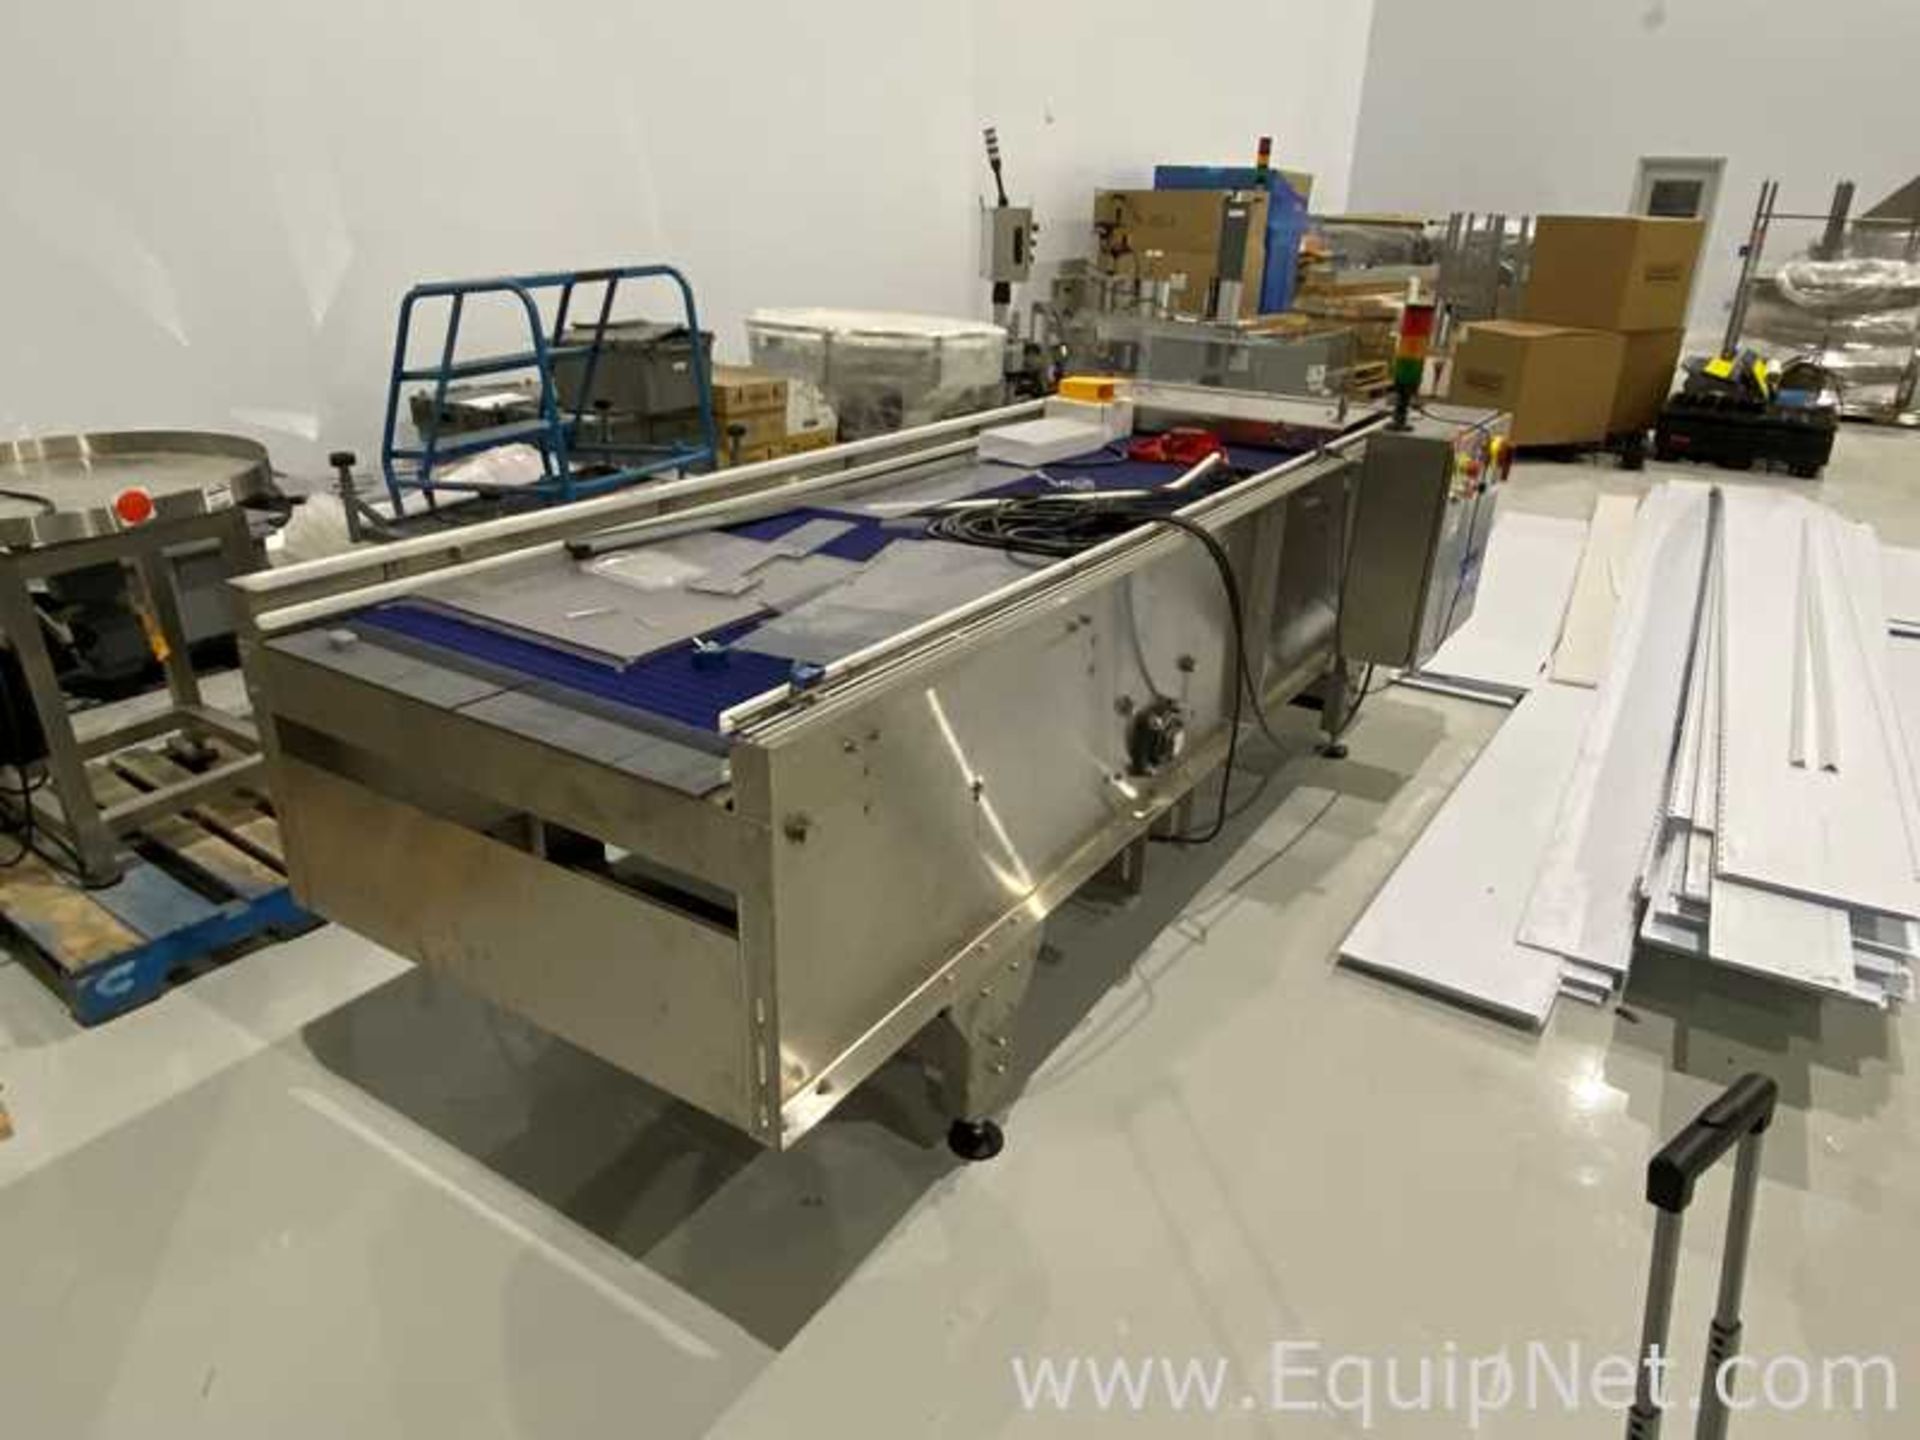 George A Wright and Son Ltd 3 x 10 Foot Bi-Flow Accumulation Table - Image 2 of 8